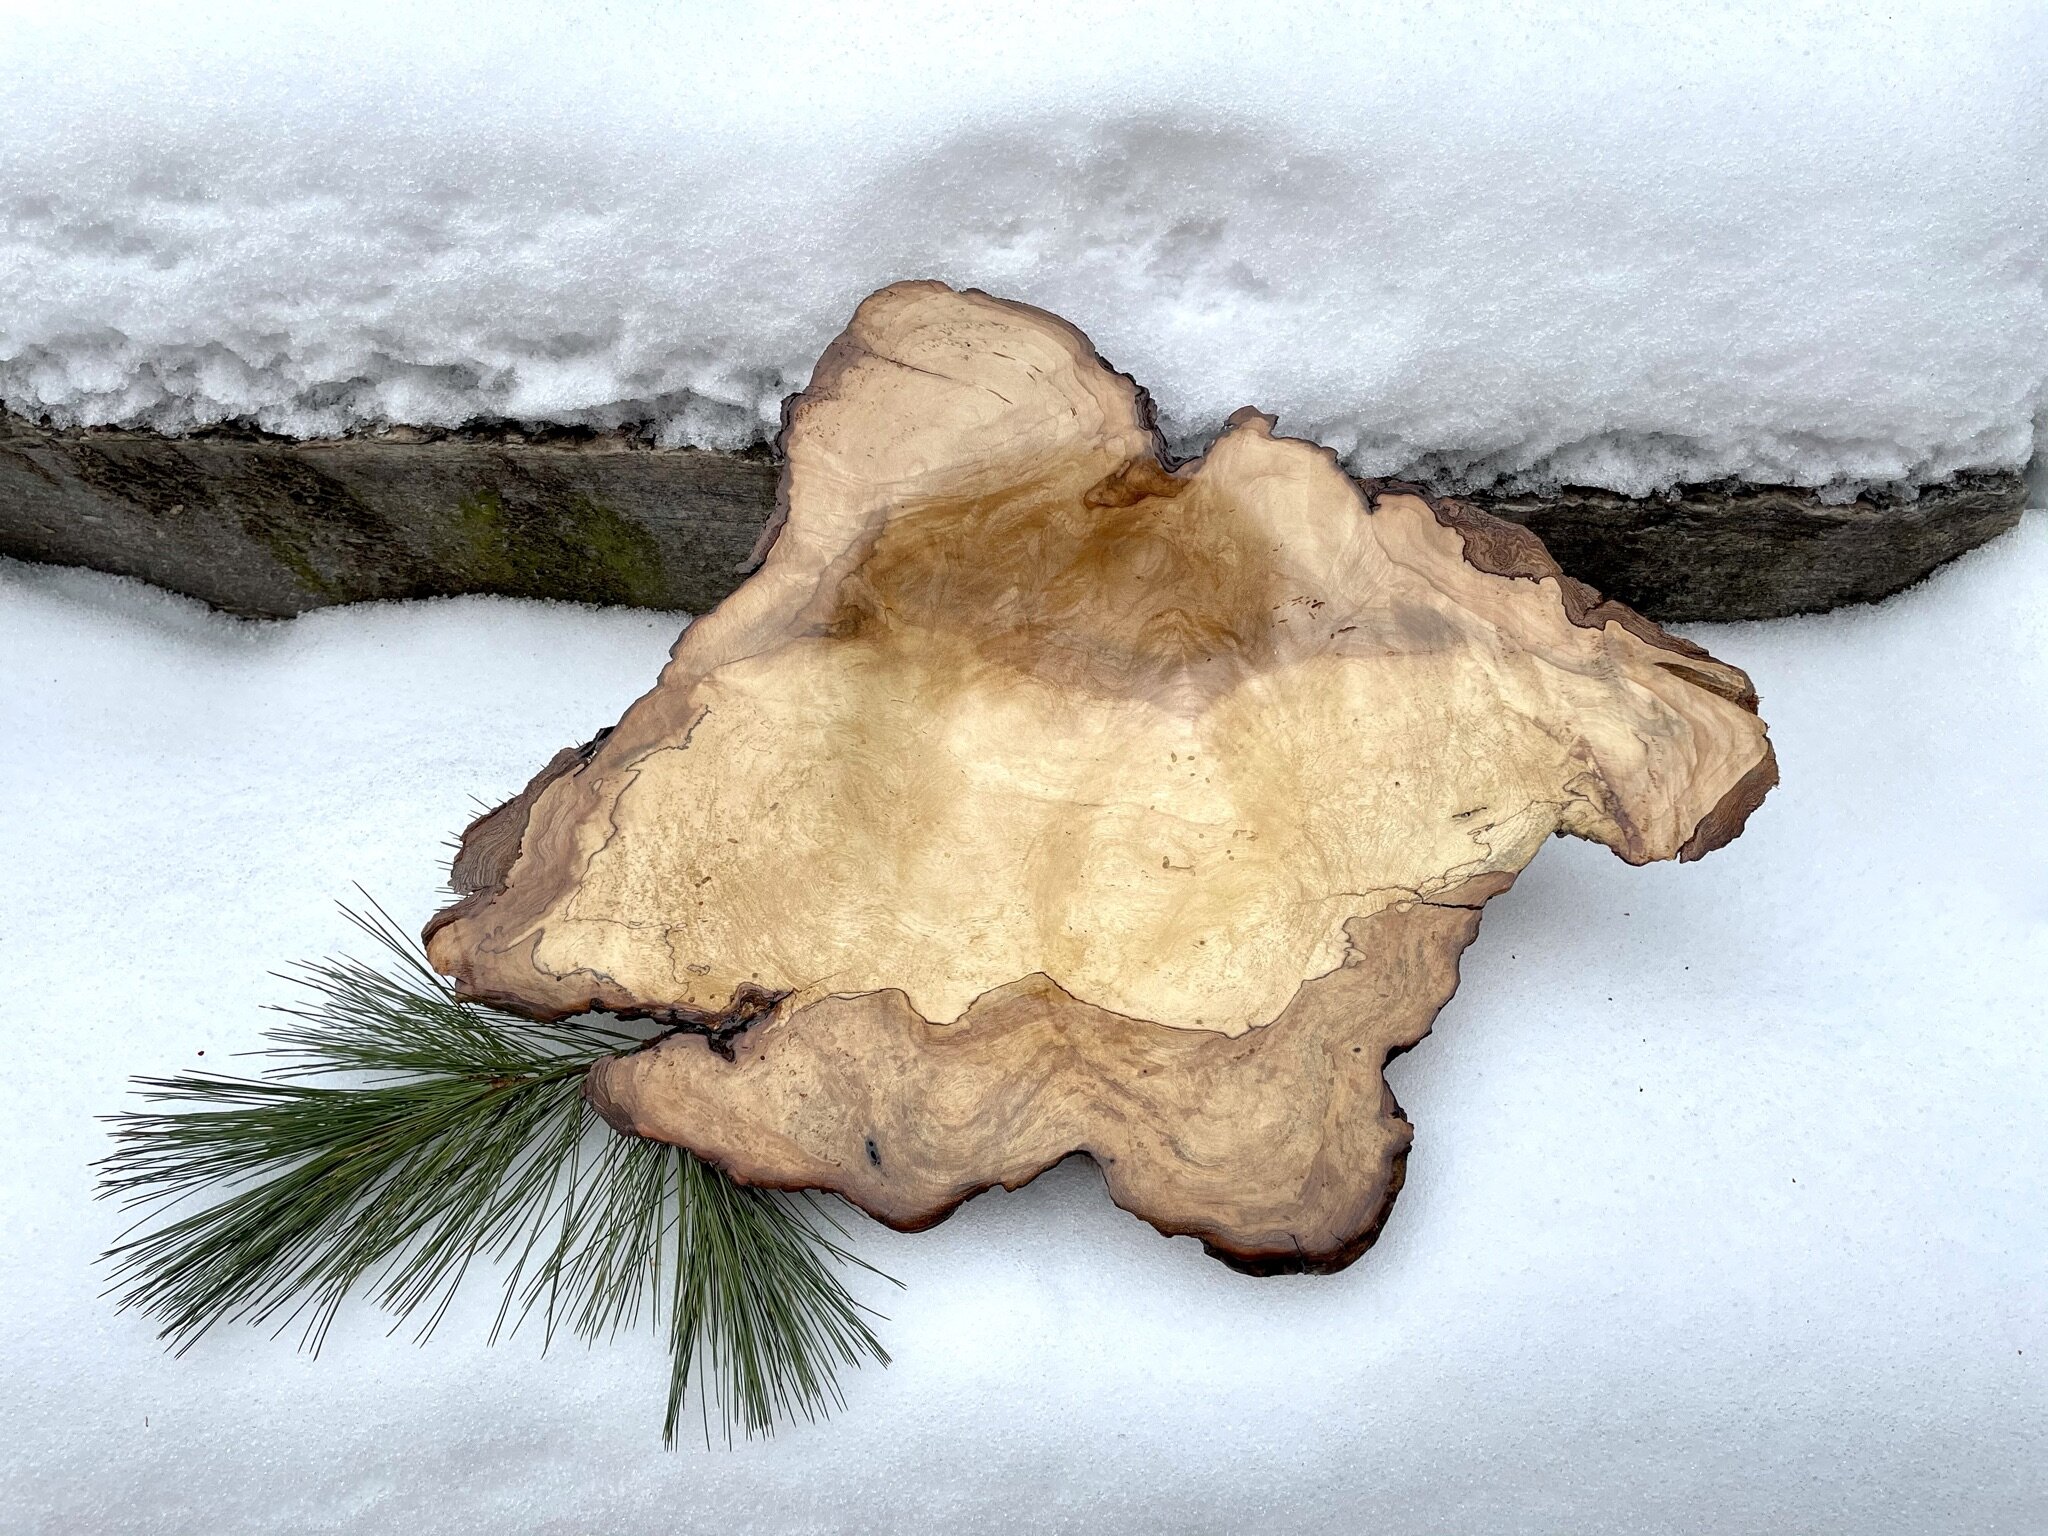  We photographed this Maple Burl Bowl outside on a winter day. The dramatic figuring and spalting are fabulous in this piece.  Maple Burl Bowl 21” x 3” high $600 